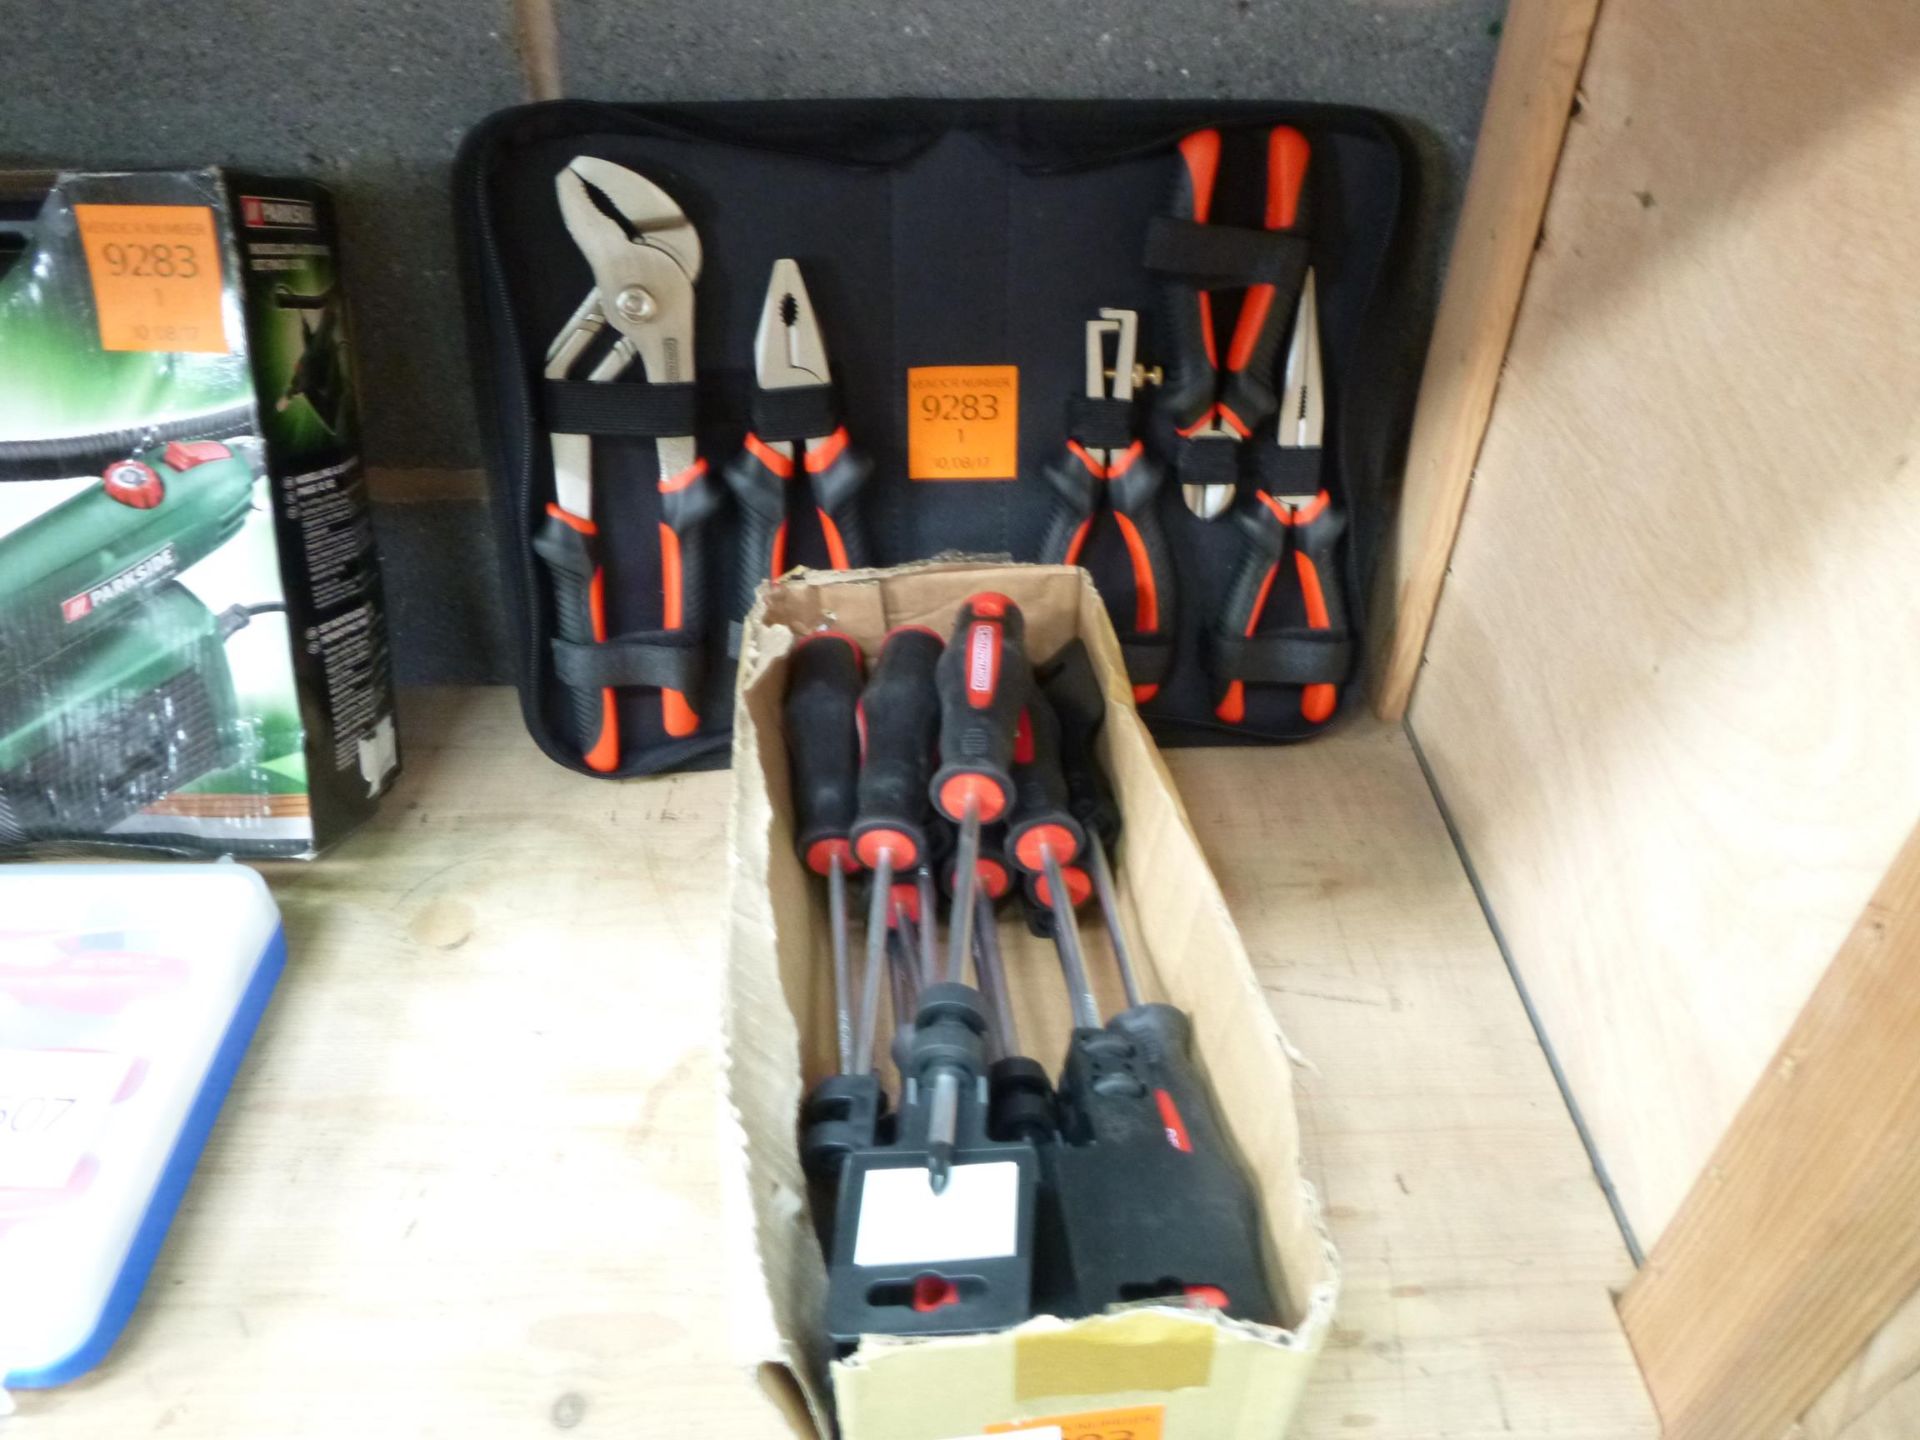 A qty of Contractor PH2x150mm Screwdrivers c/w a 5 piece Tool Set.